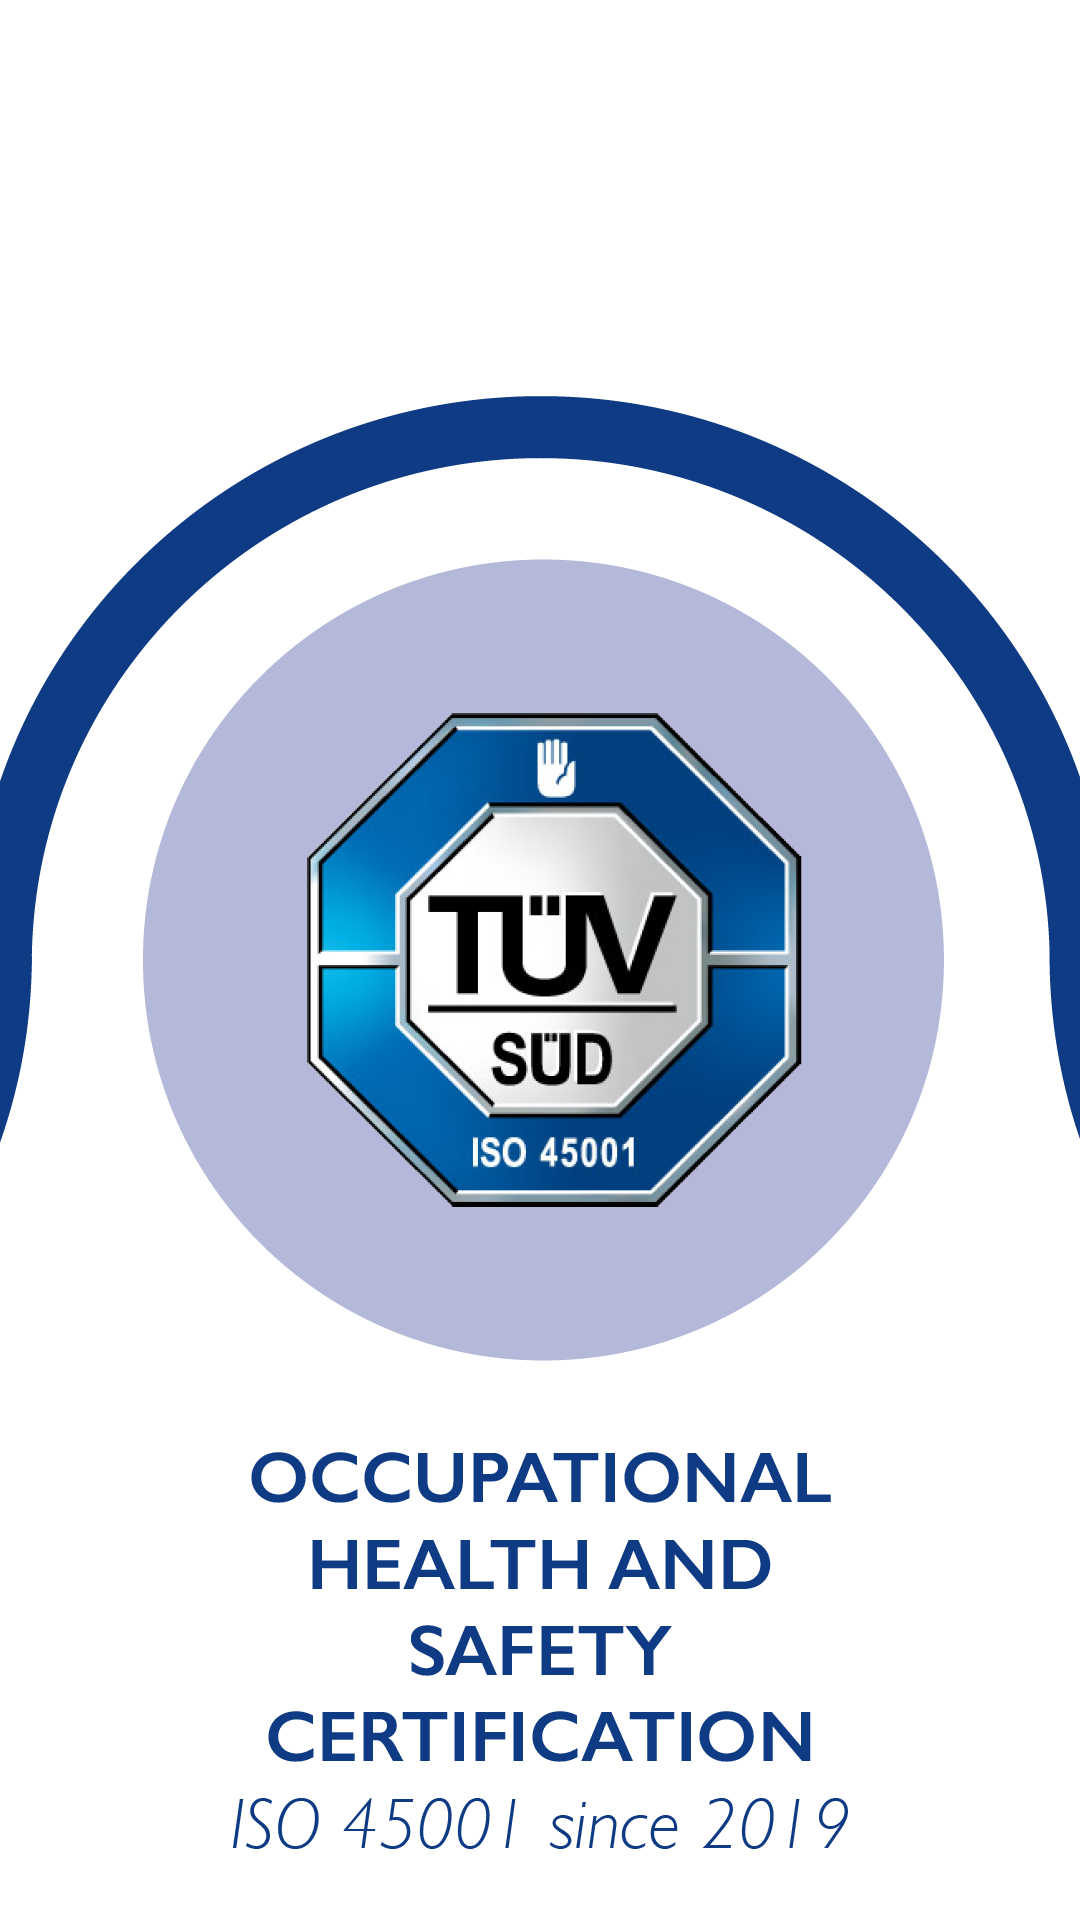 OCCUPATIONAL HEALTH AND SAFETY CERTIFICATION - ISO 45001 since 2019